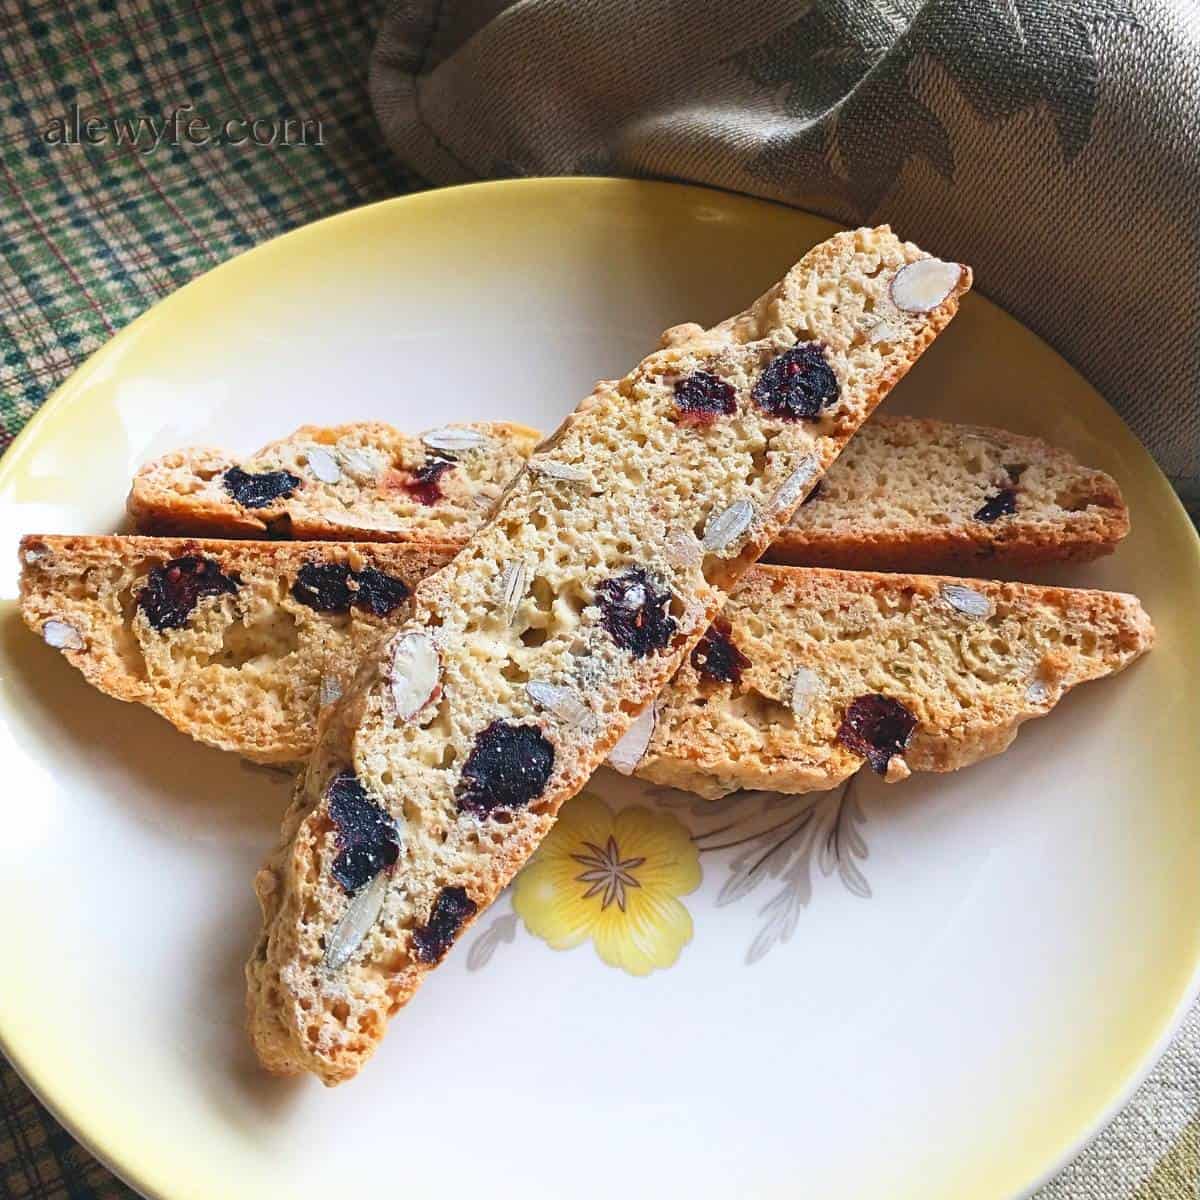 Three biscotti studded with almonds, pepitas, and dried cranberries. The cookies are on a vintage mid-century ceramic plate with a yellow rim and a flower.